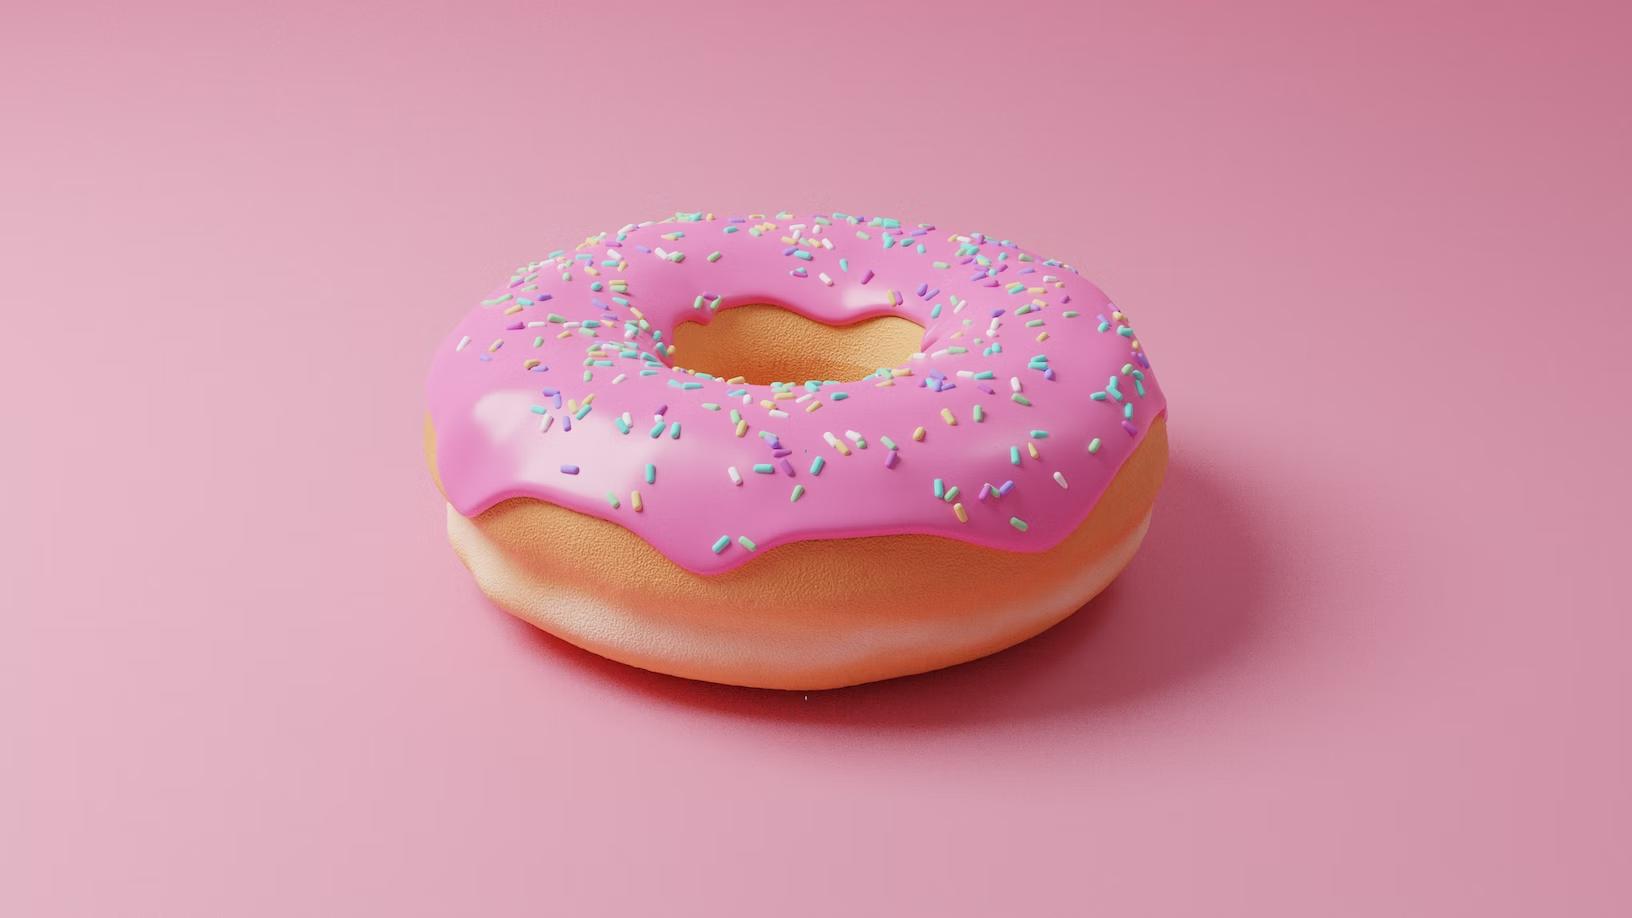 A more modern history of donuts